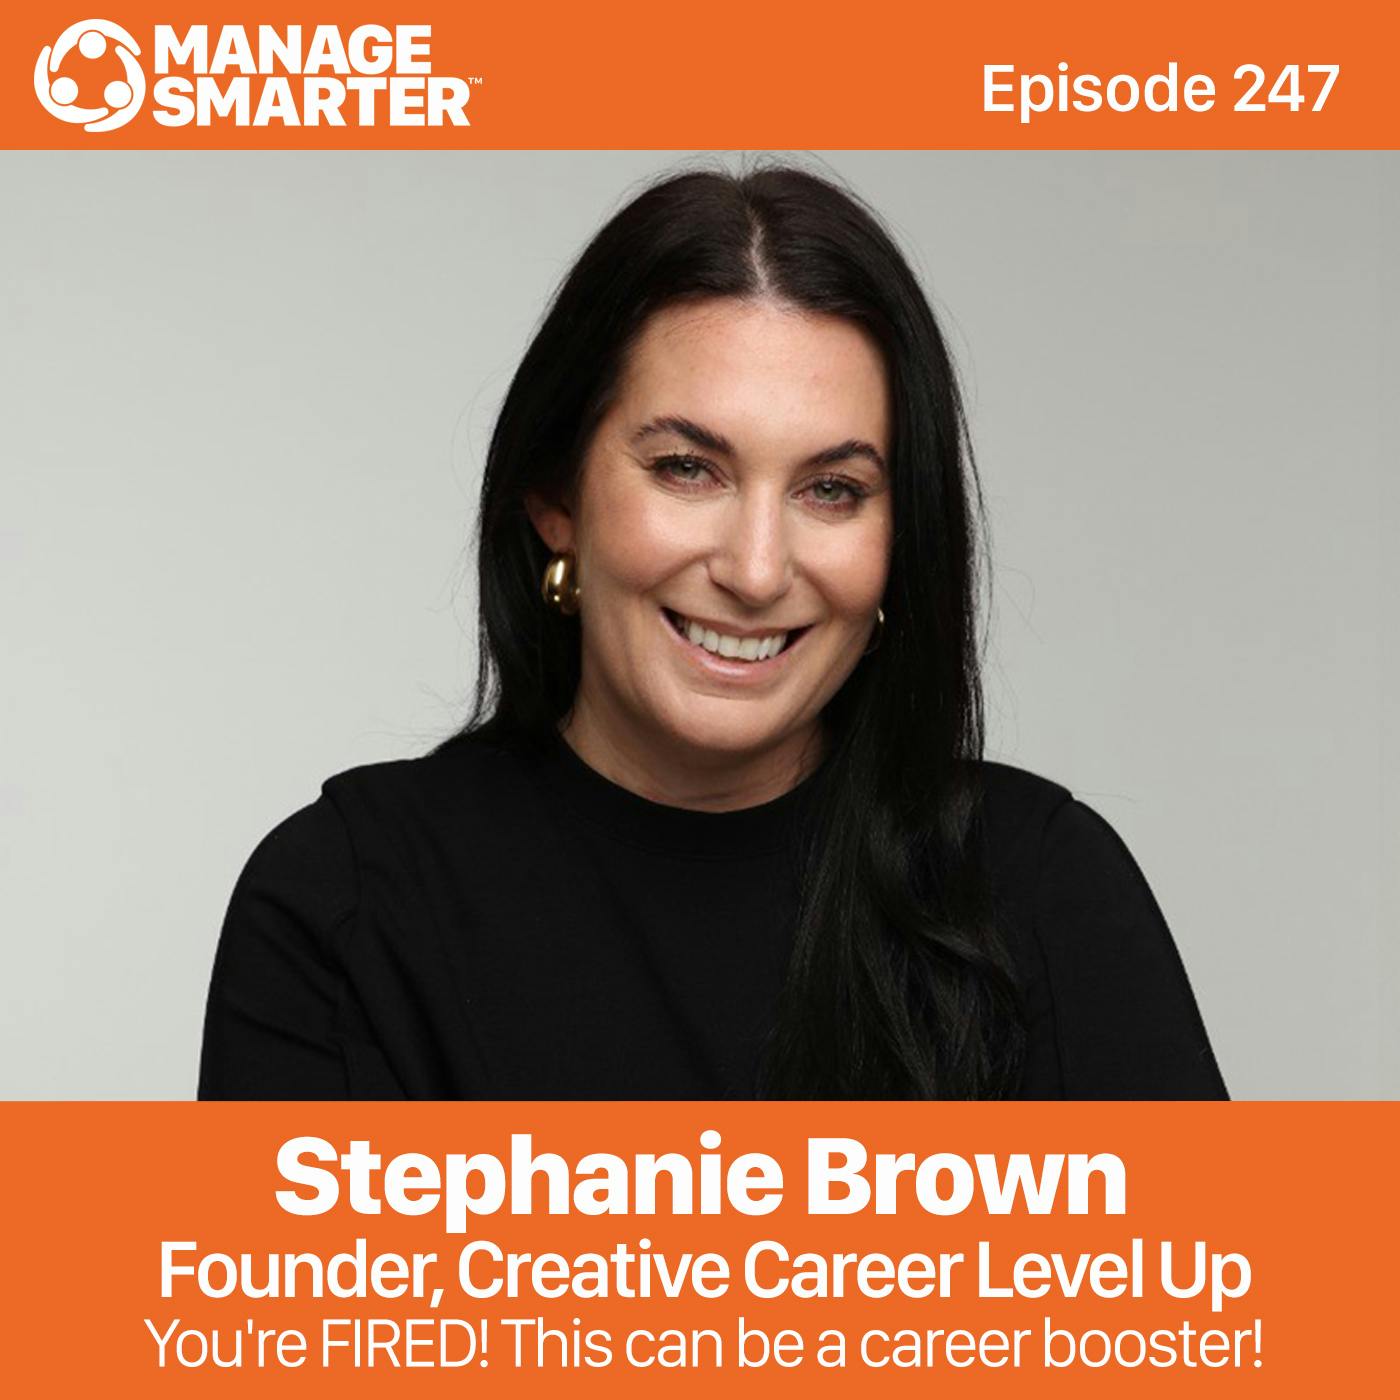 247 Stephanie Brown: You’re FIRED! This can be a career booster!